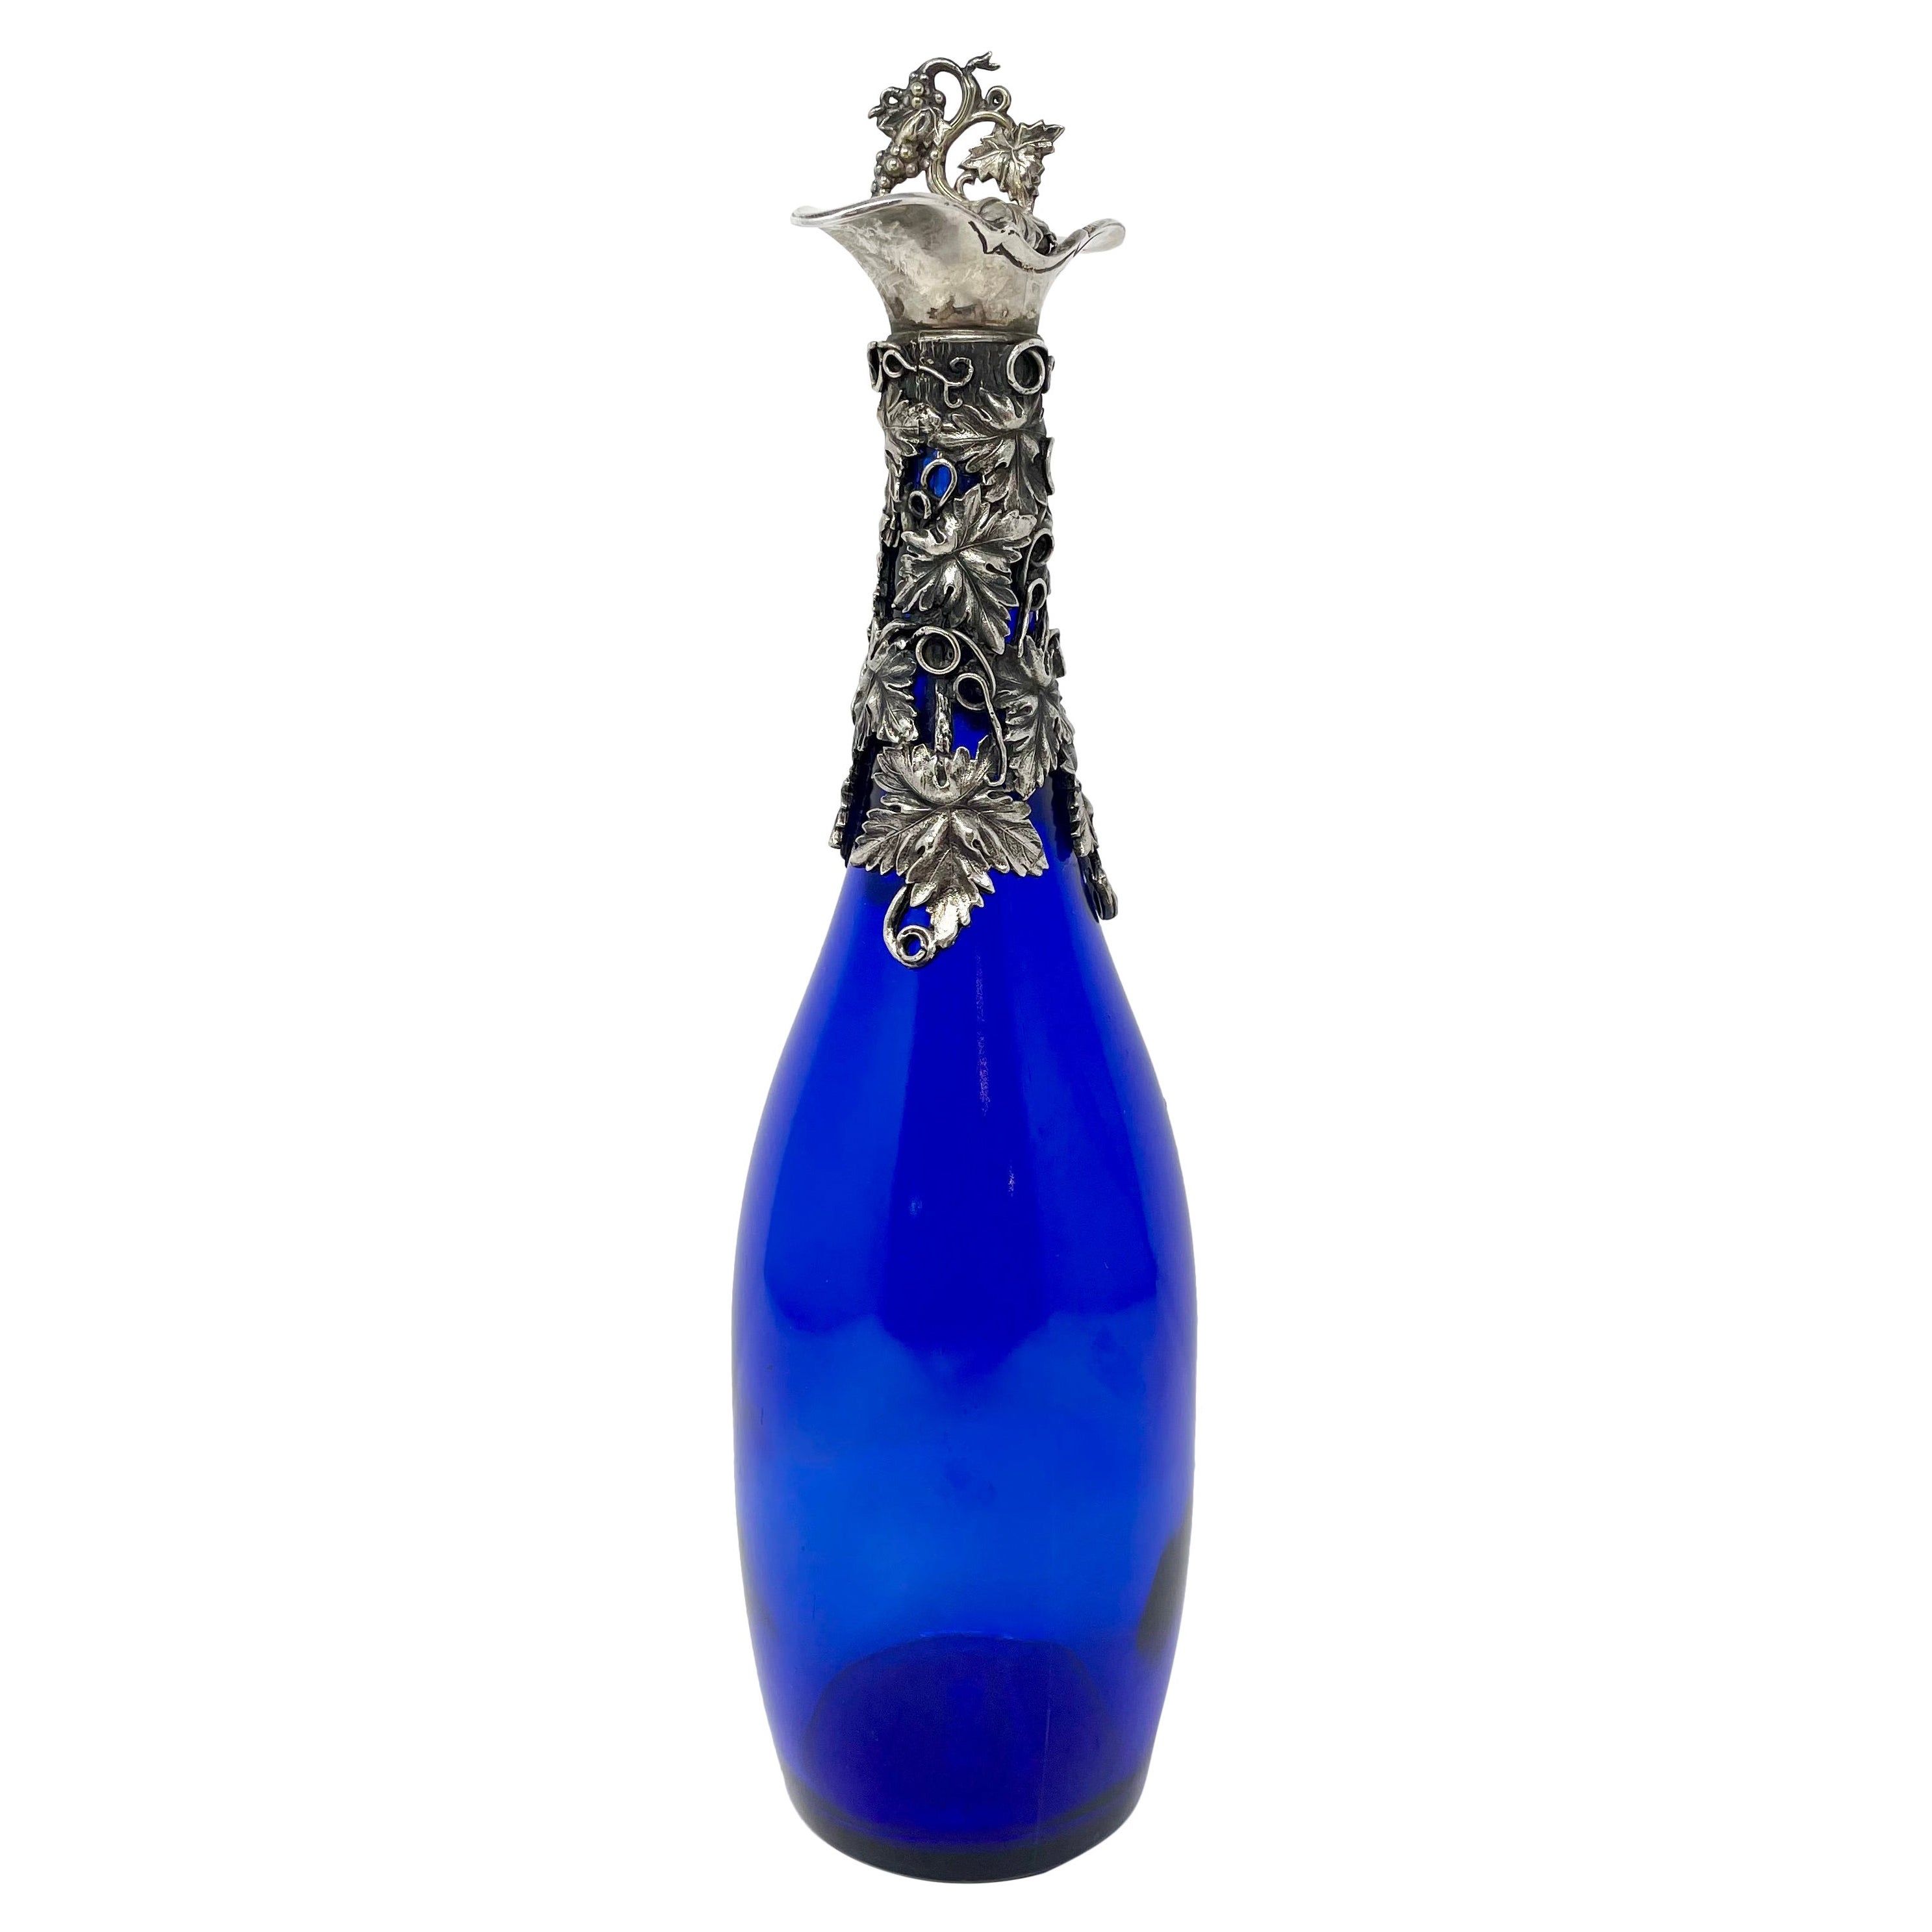 Antique Cobalt Blue Glass Liquor Bottle with Sterling Silver Top Circa 1890-1900 For Sale